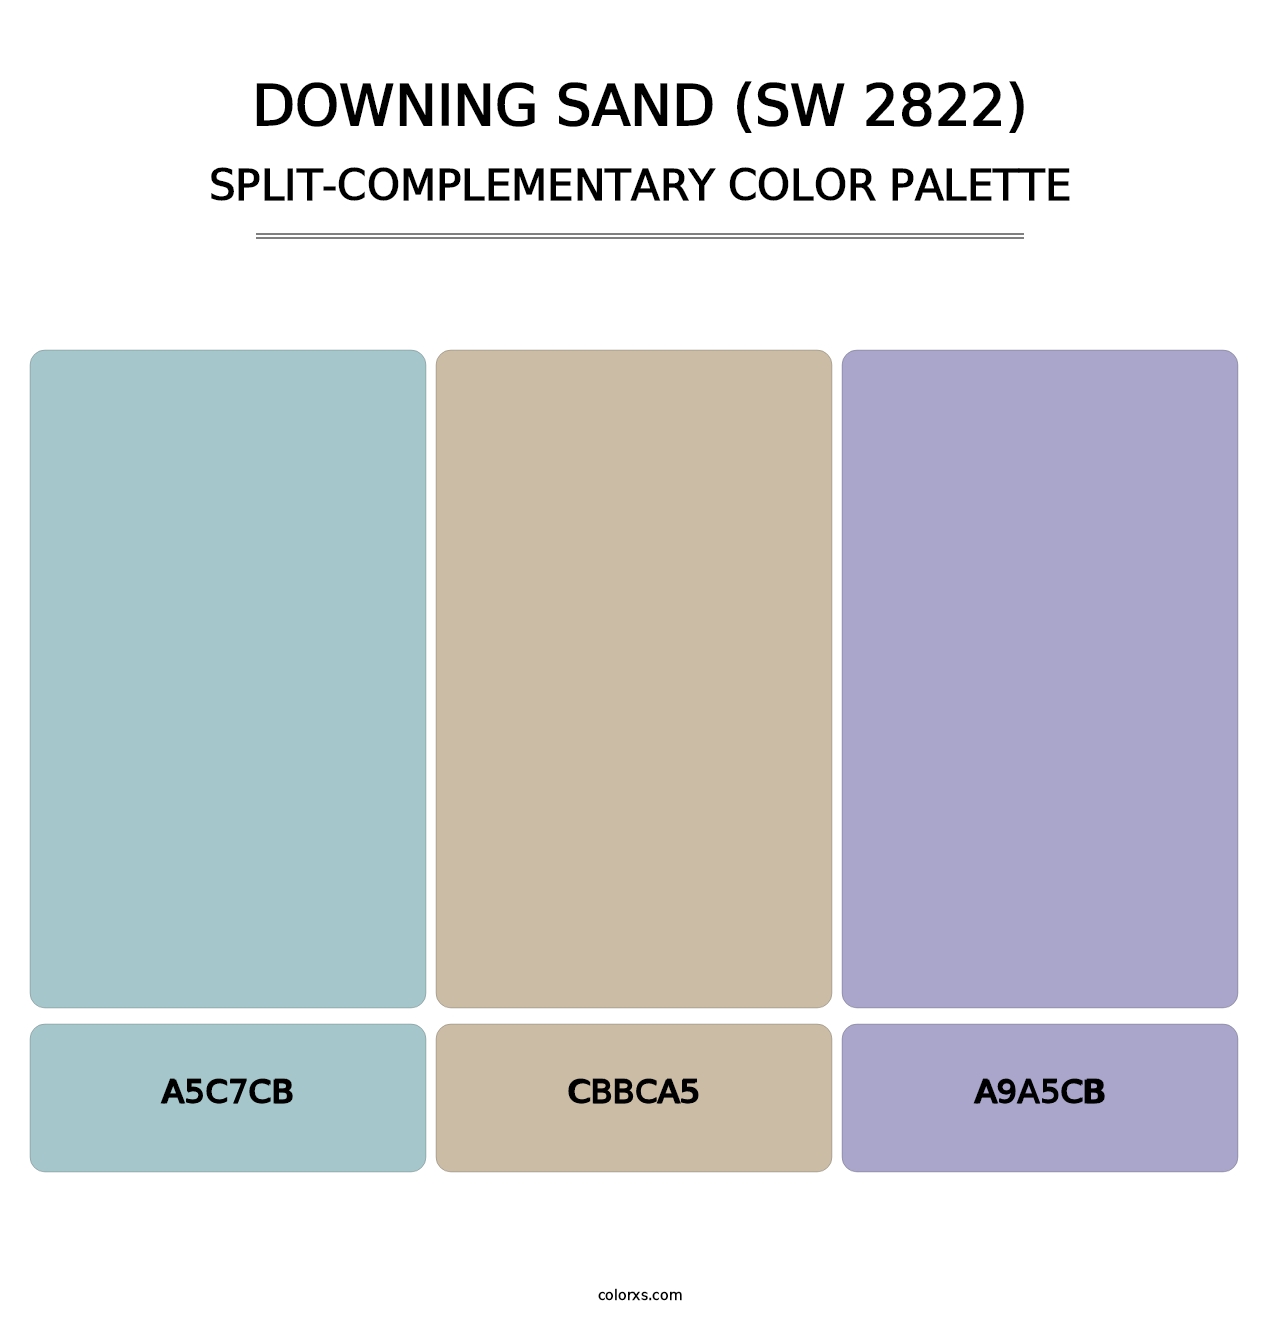 Downing Sand (SW 2822) - Split-Complementary Color Palette